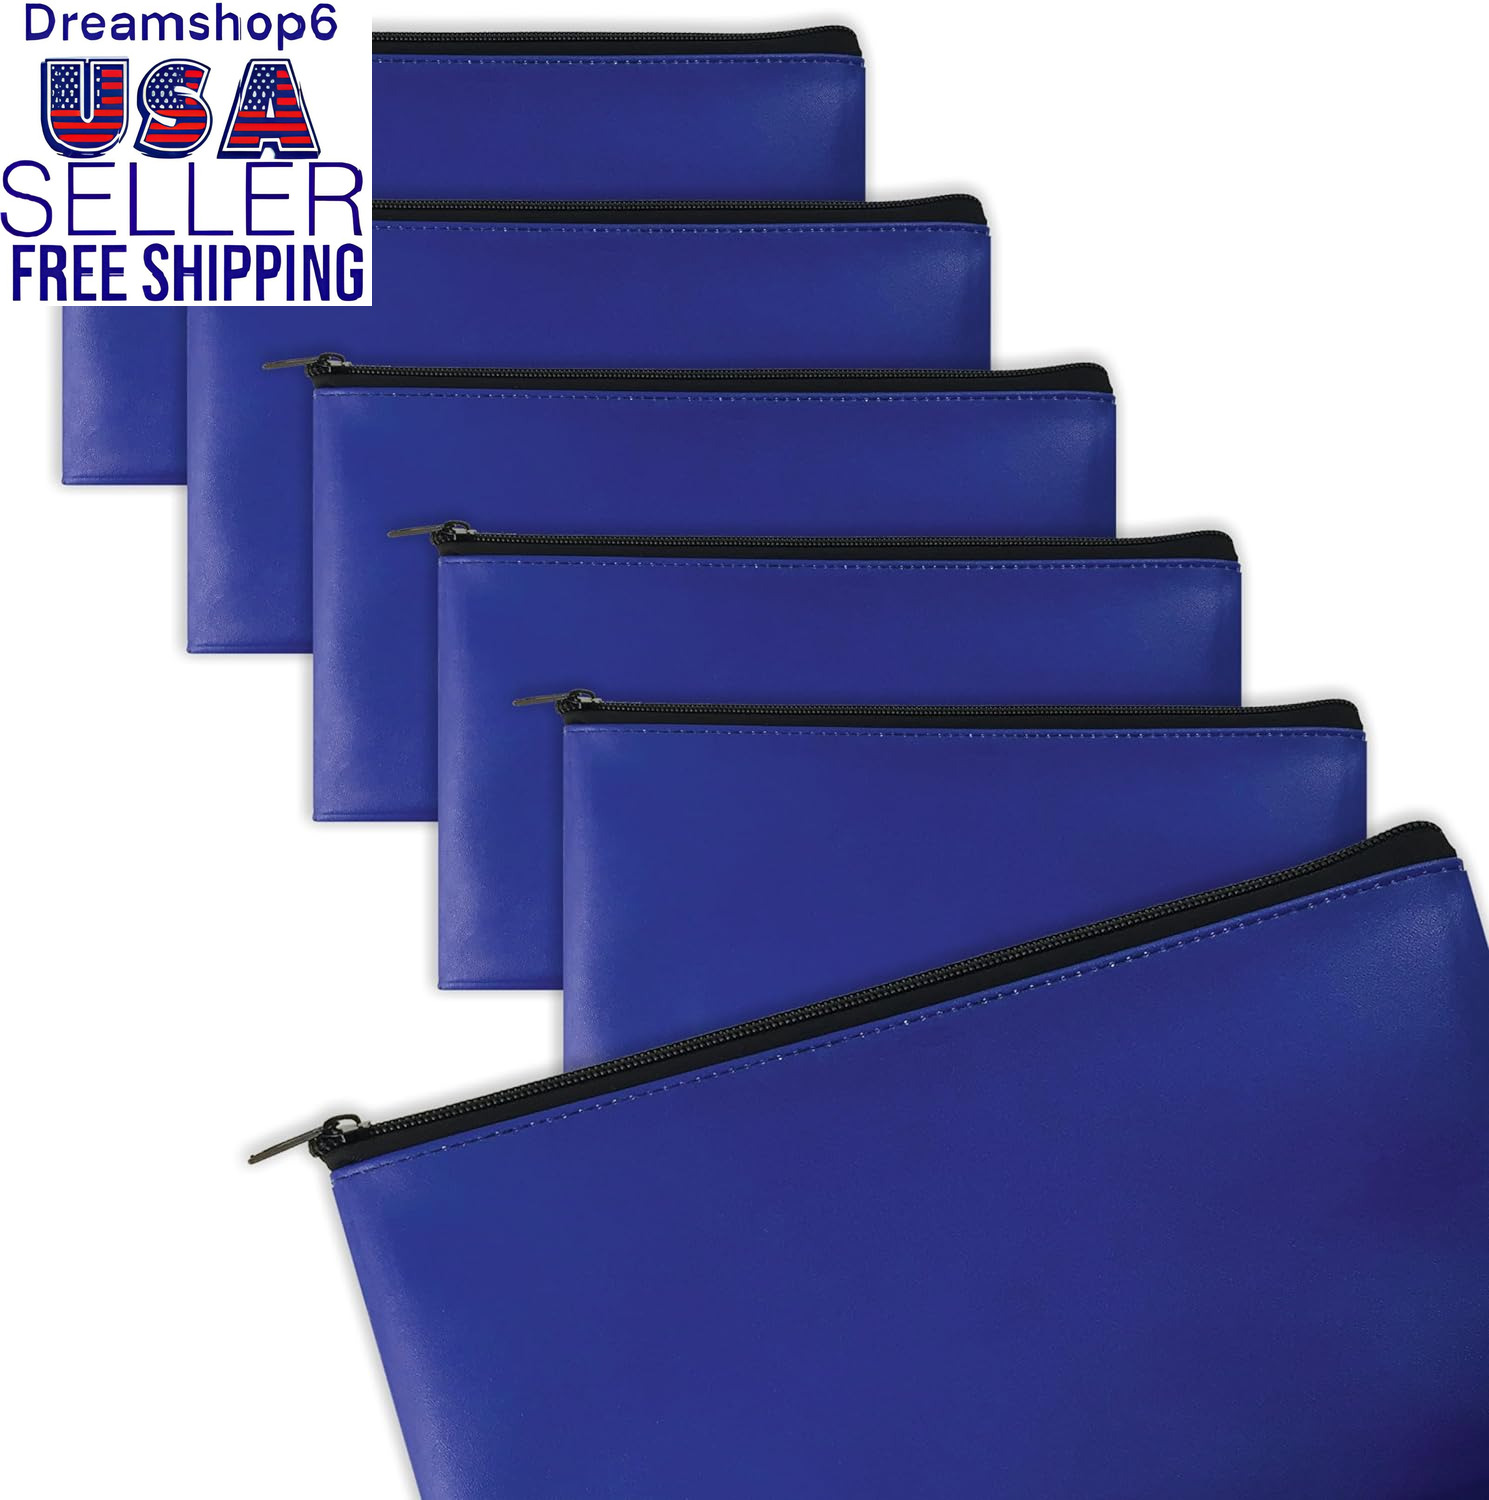 Better Office Products 6 Pack, Zippered Security Bank Deposit Bag, Leatherette, 